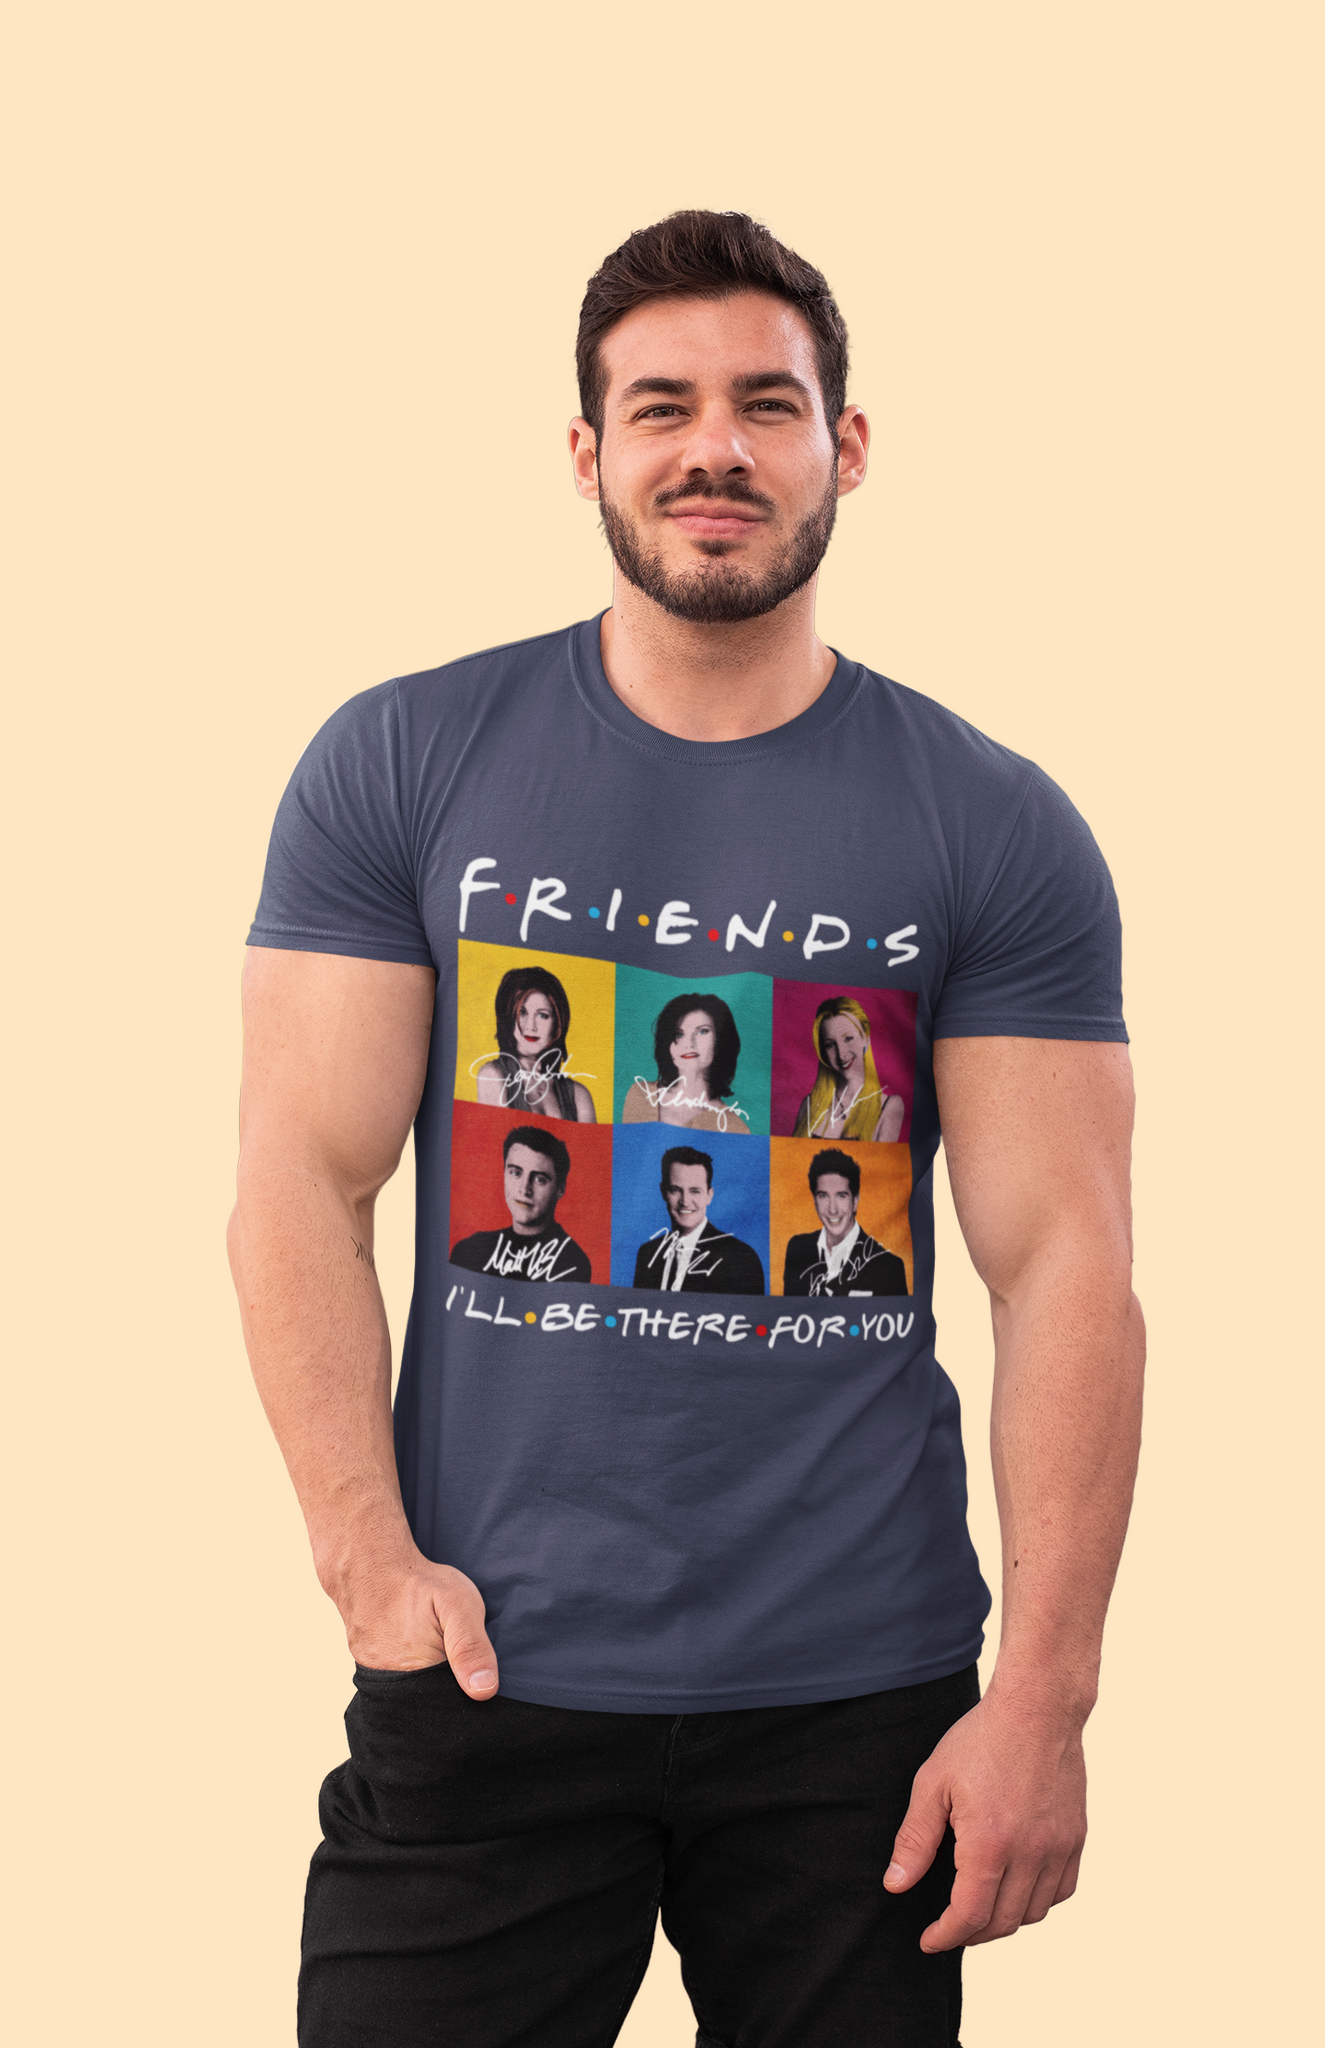 Friends TV Show T Shirt, Friends Shirt, Friends Characters T Shirt, Ill Be There For You Tshirt